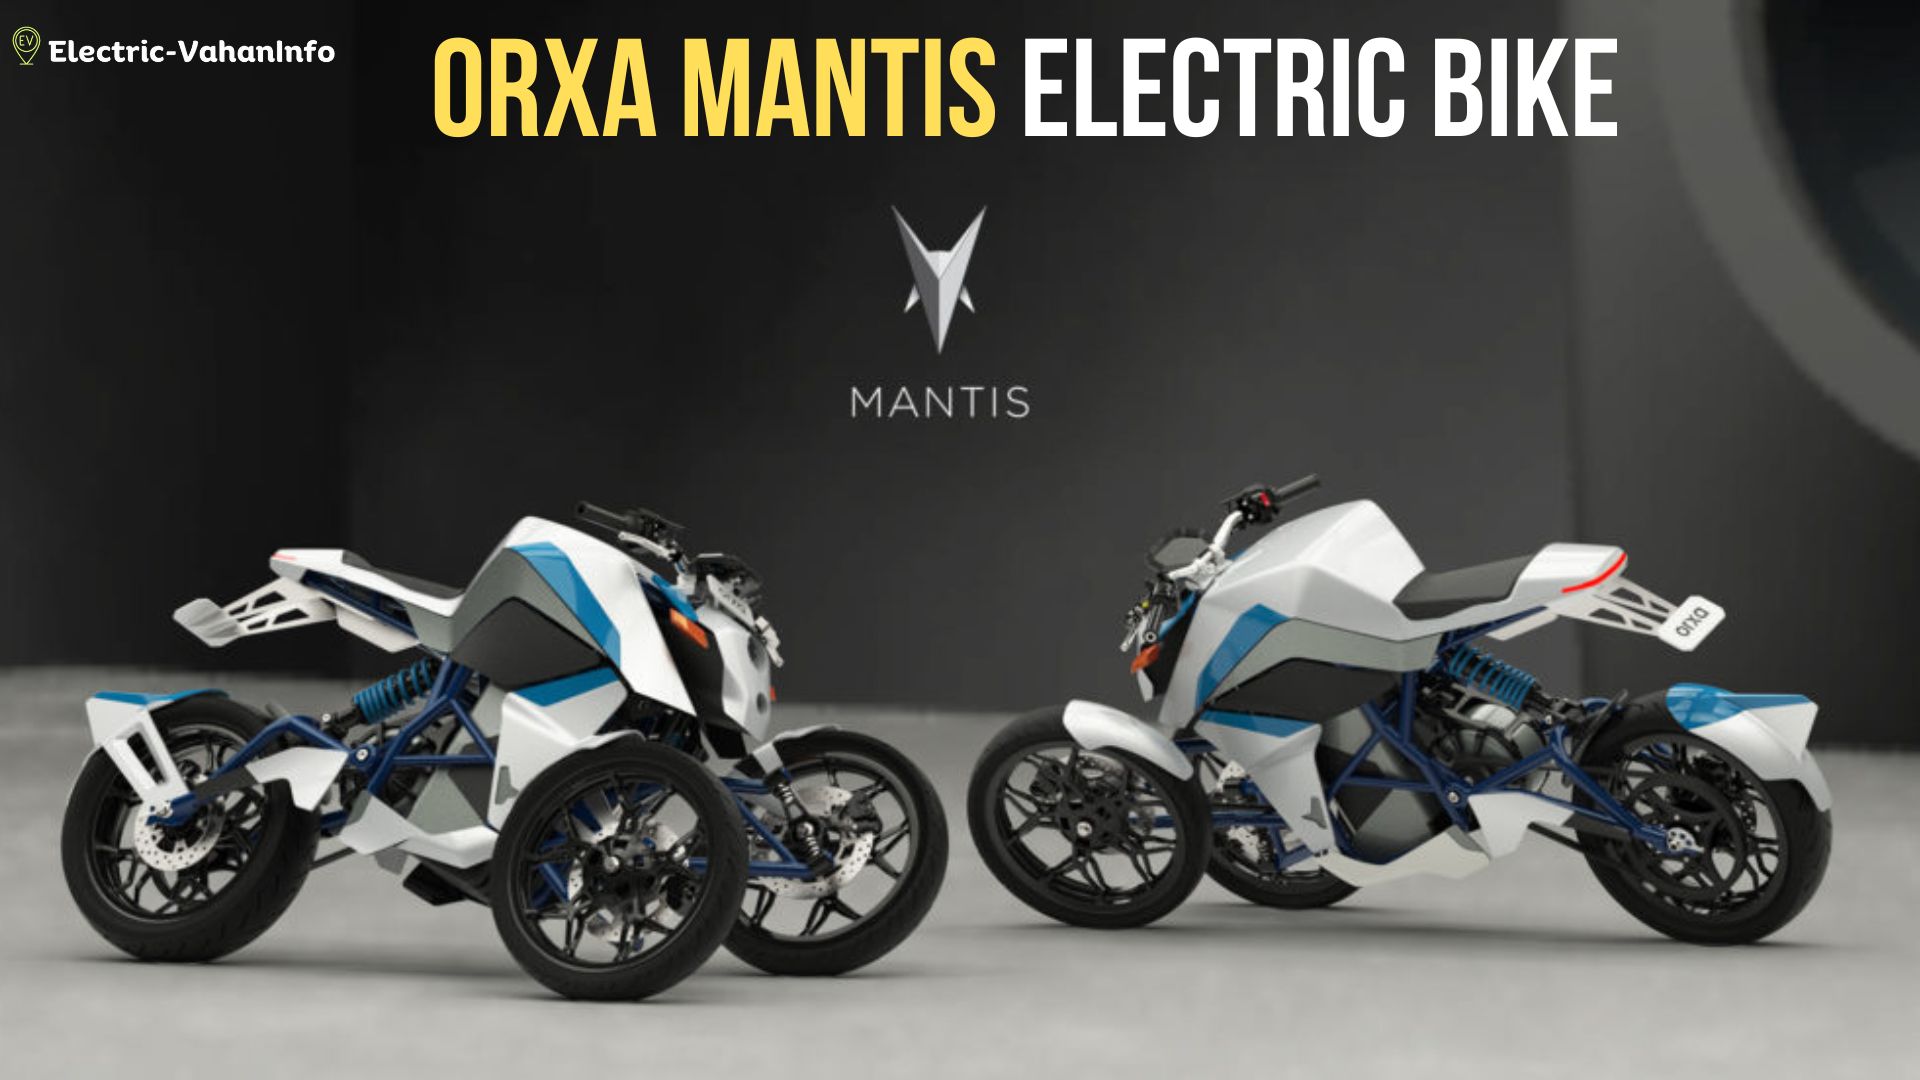 https://electric-vahaninfo.com/orxa-mantis-electric-bike-launched-at-rs-3-6-lakh-221-km-range/